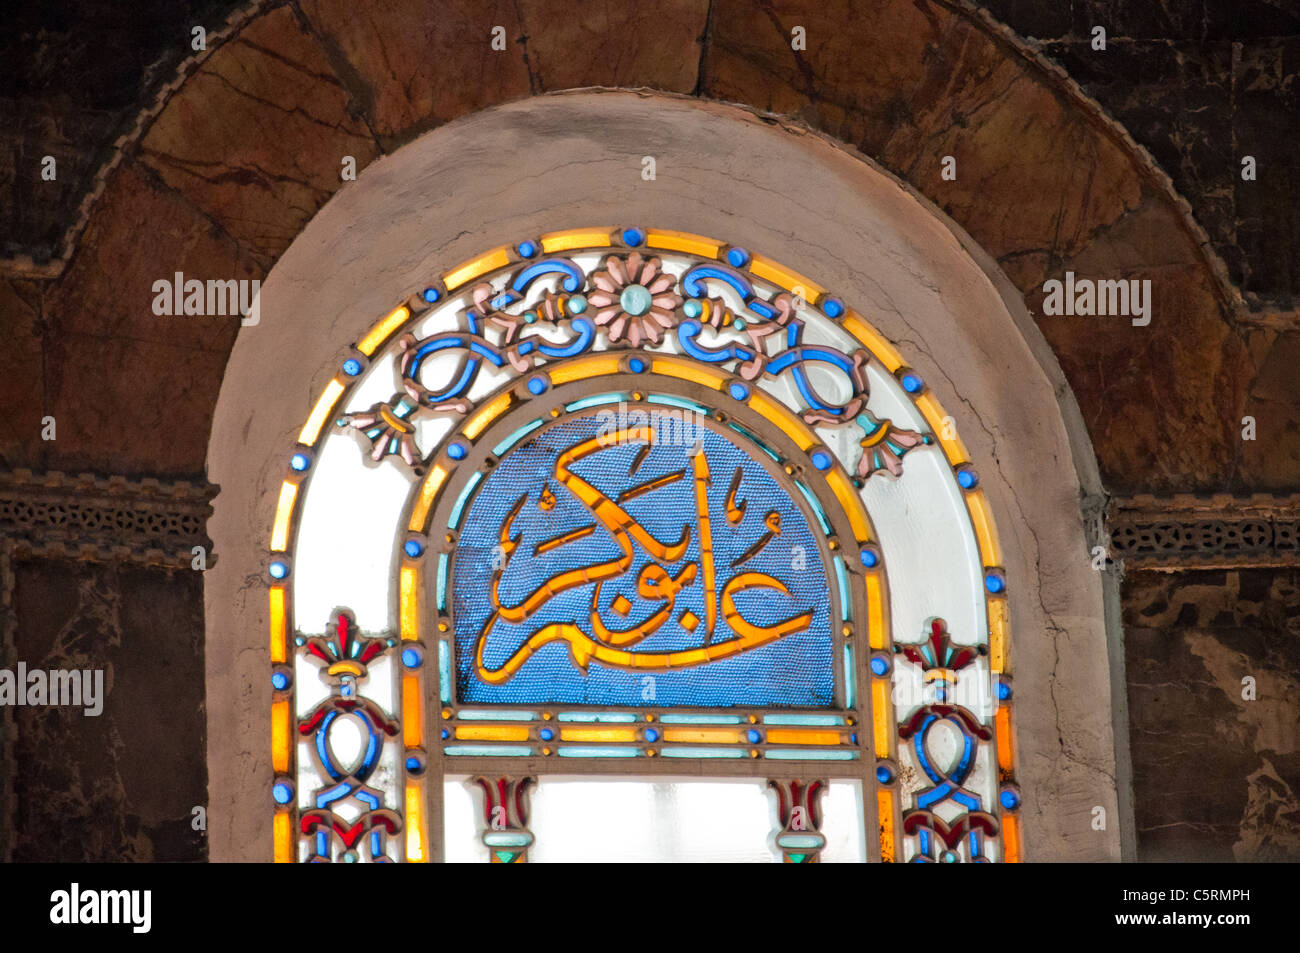 Stained glass window with arabic script, Ayasofya (Hagia Sophia) cathedral and mosque, Istanbul, Turkey Stock Photo